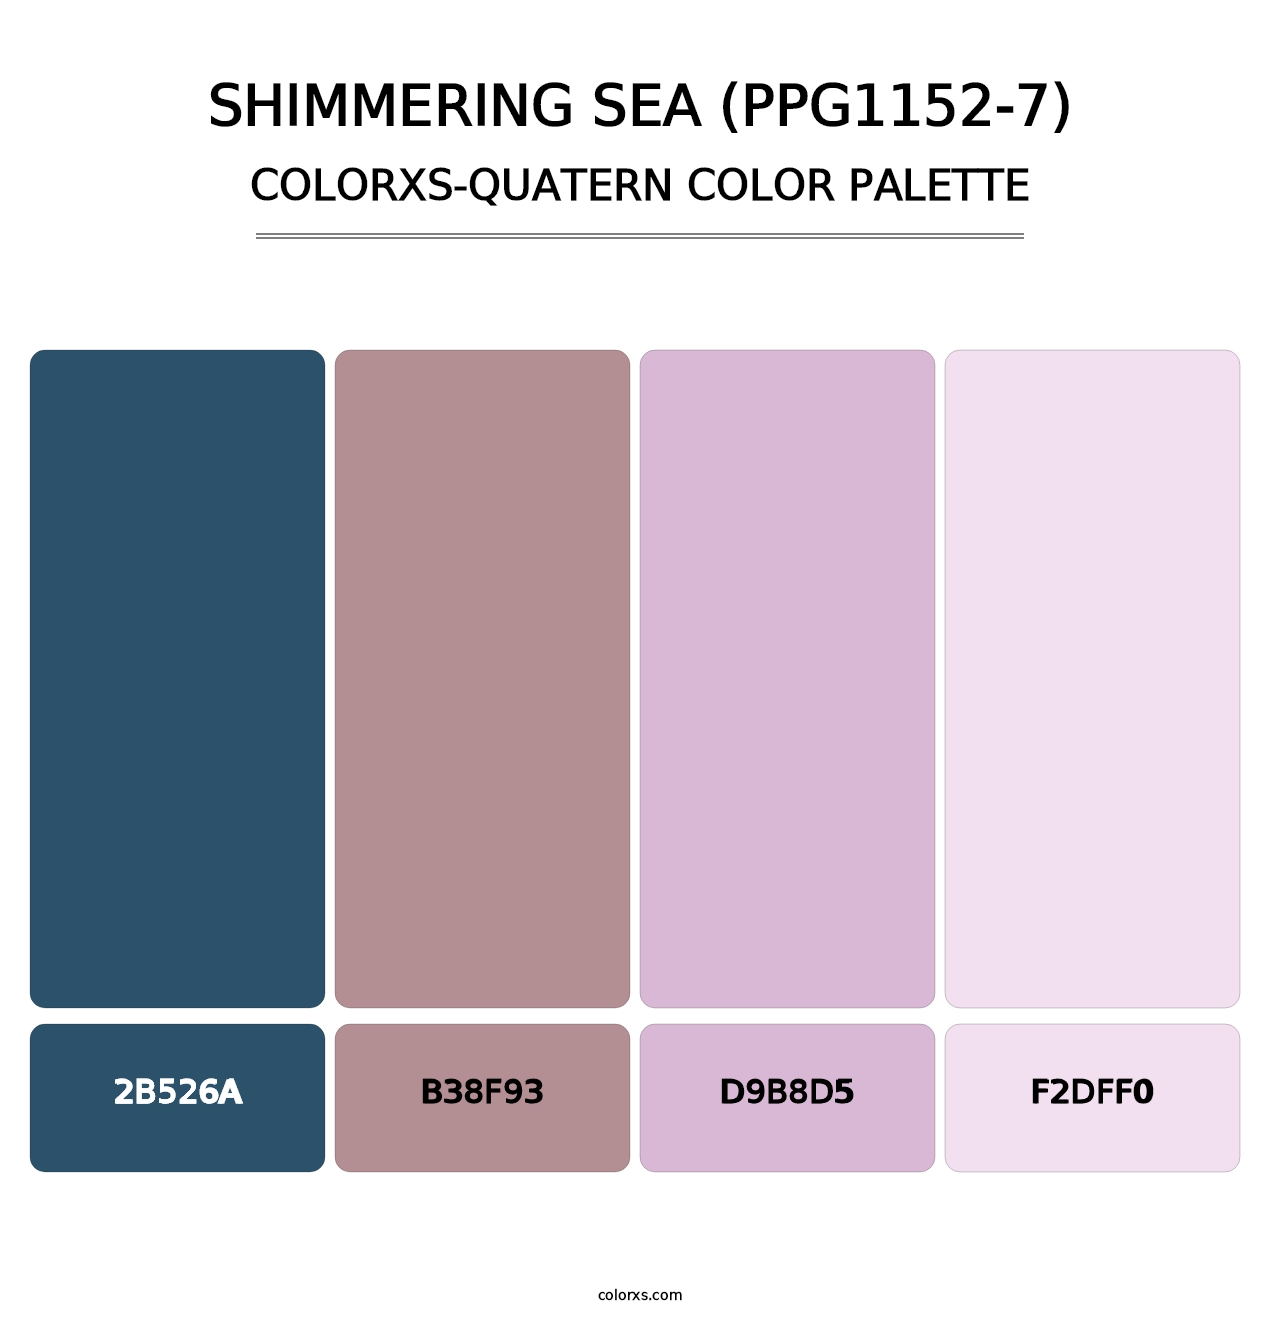 Shimmering Sea (PPG1152-7) - Colorxs Quatern Palette